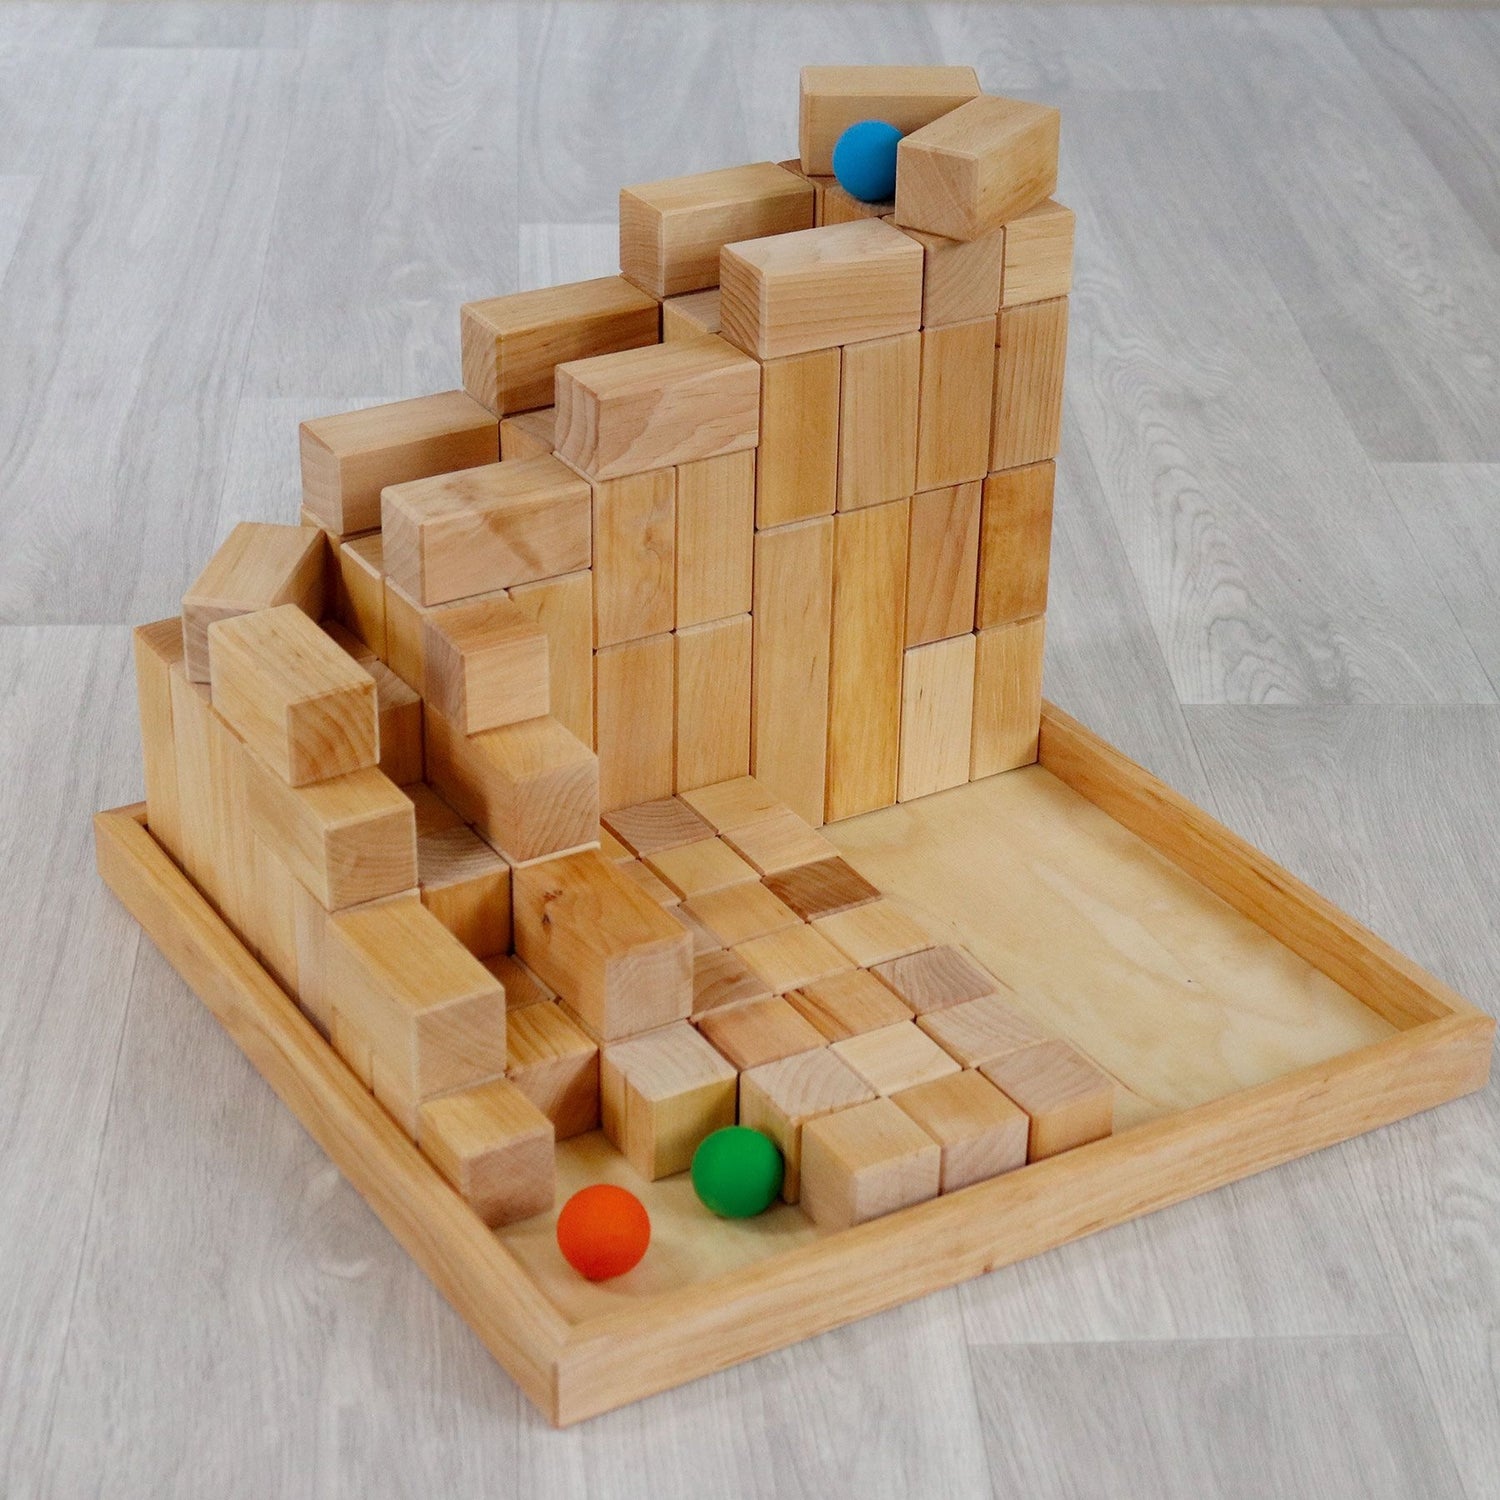 Grimm's Large Natural Stepped Pyramid Building Set